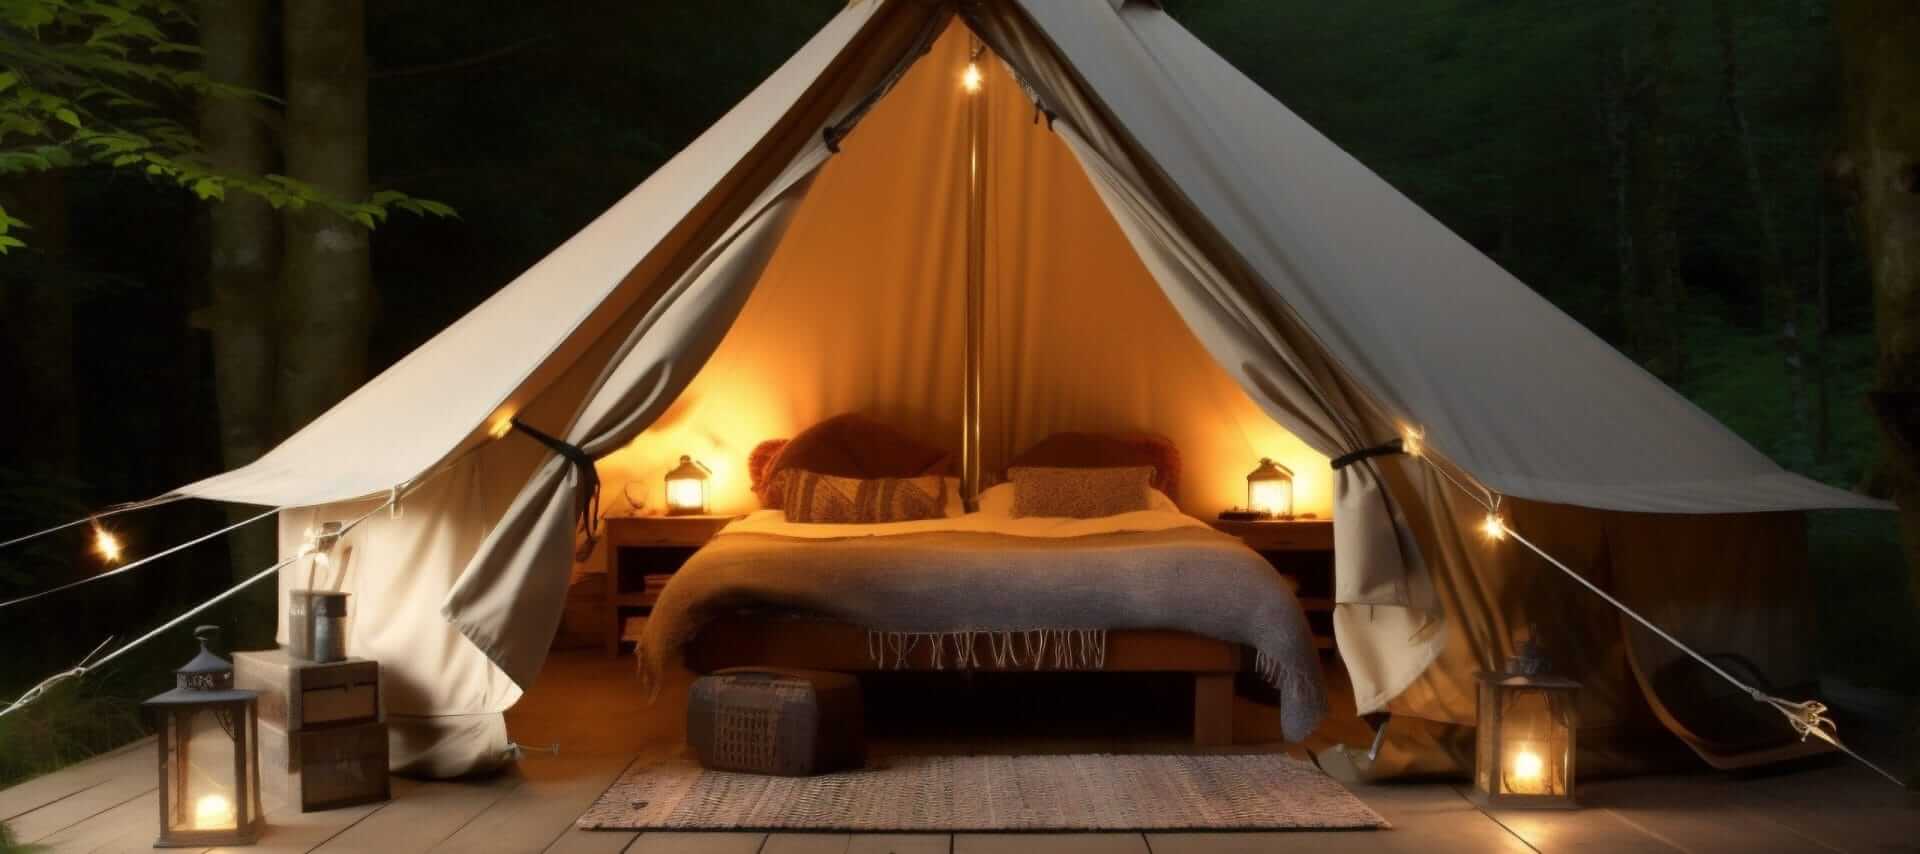 Spend a night or two glamping in upstate New York.